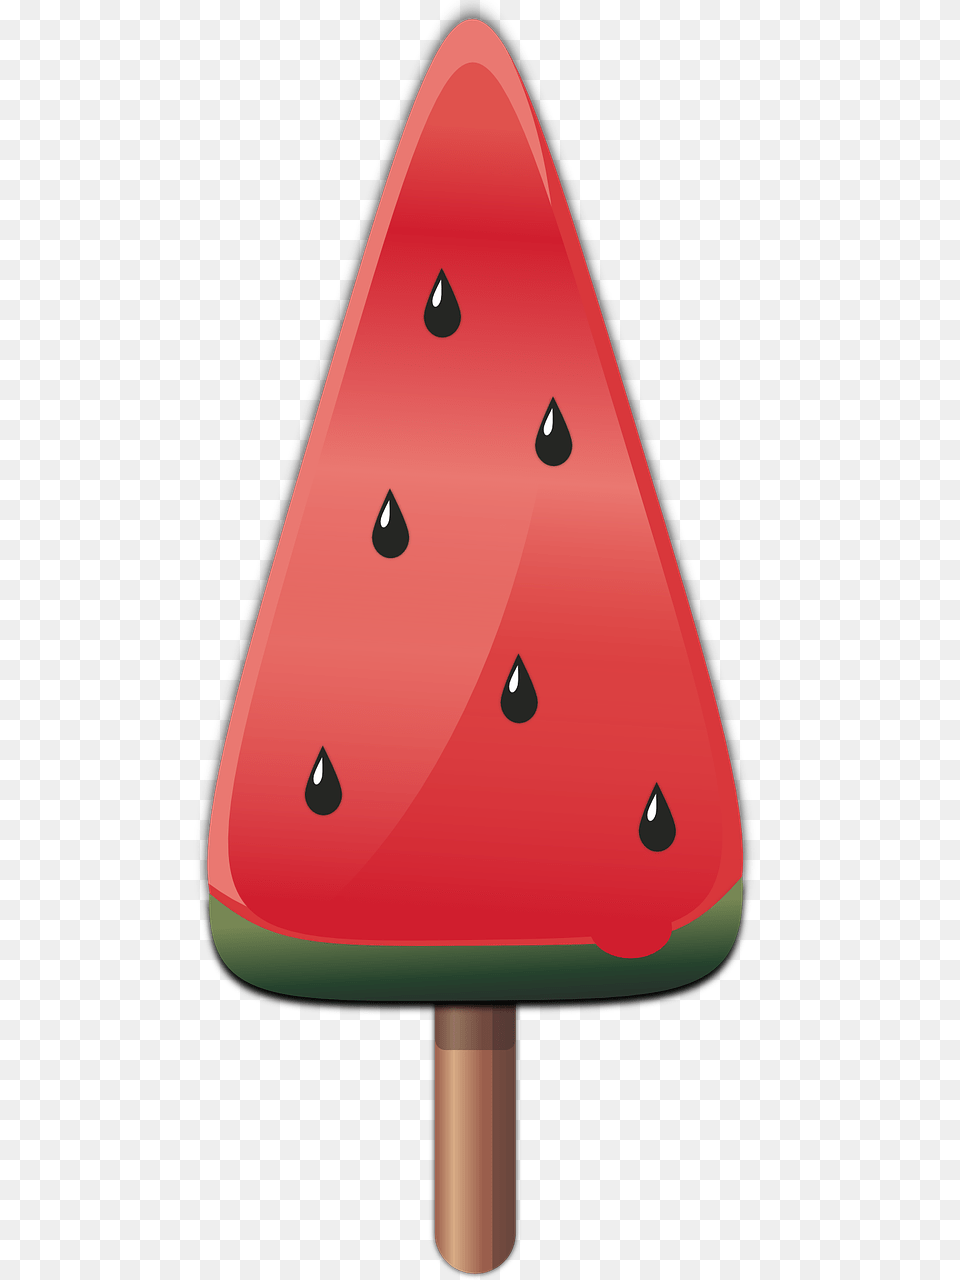 Watermelon Popsicle Ice Cream Clip Art, Food, Sweets Png